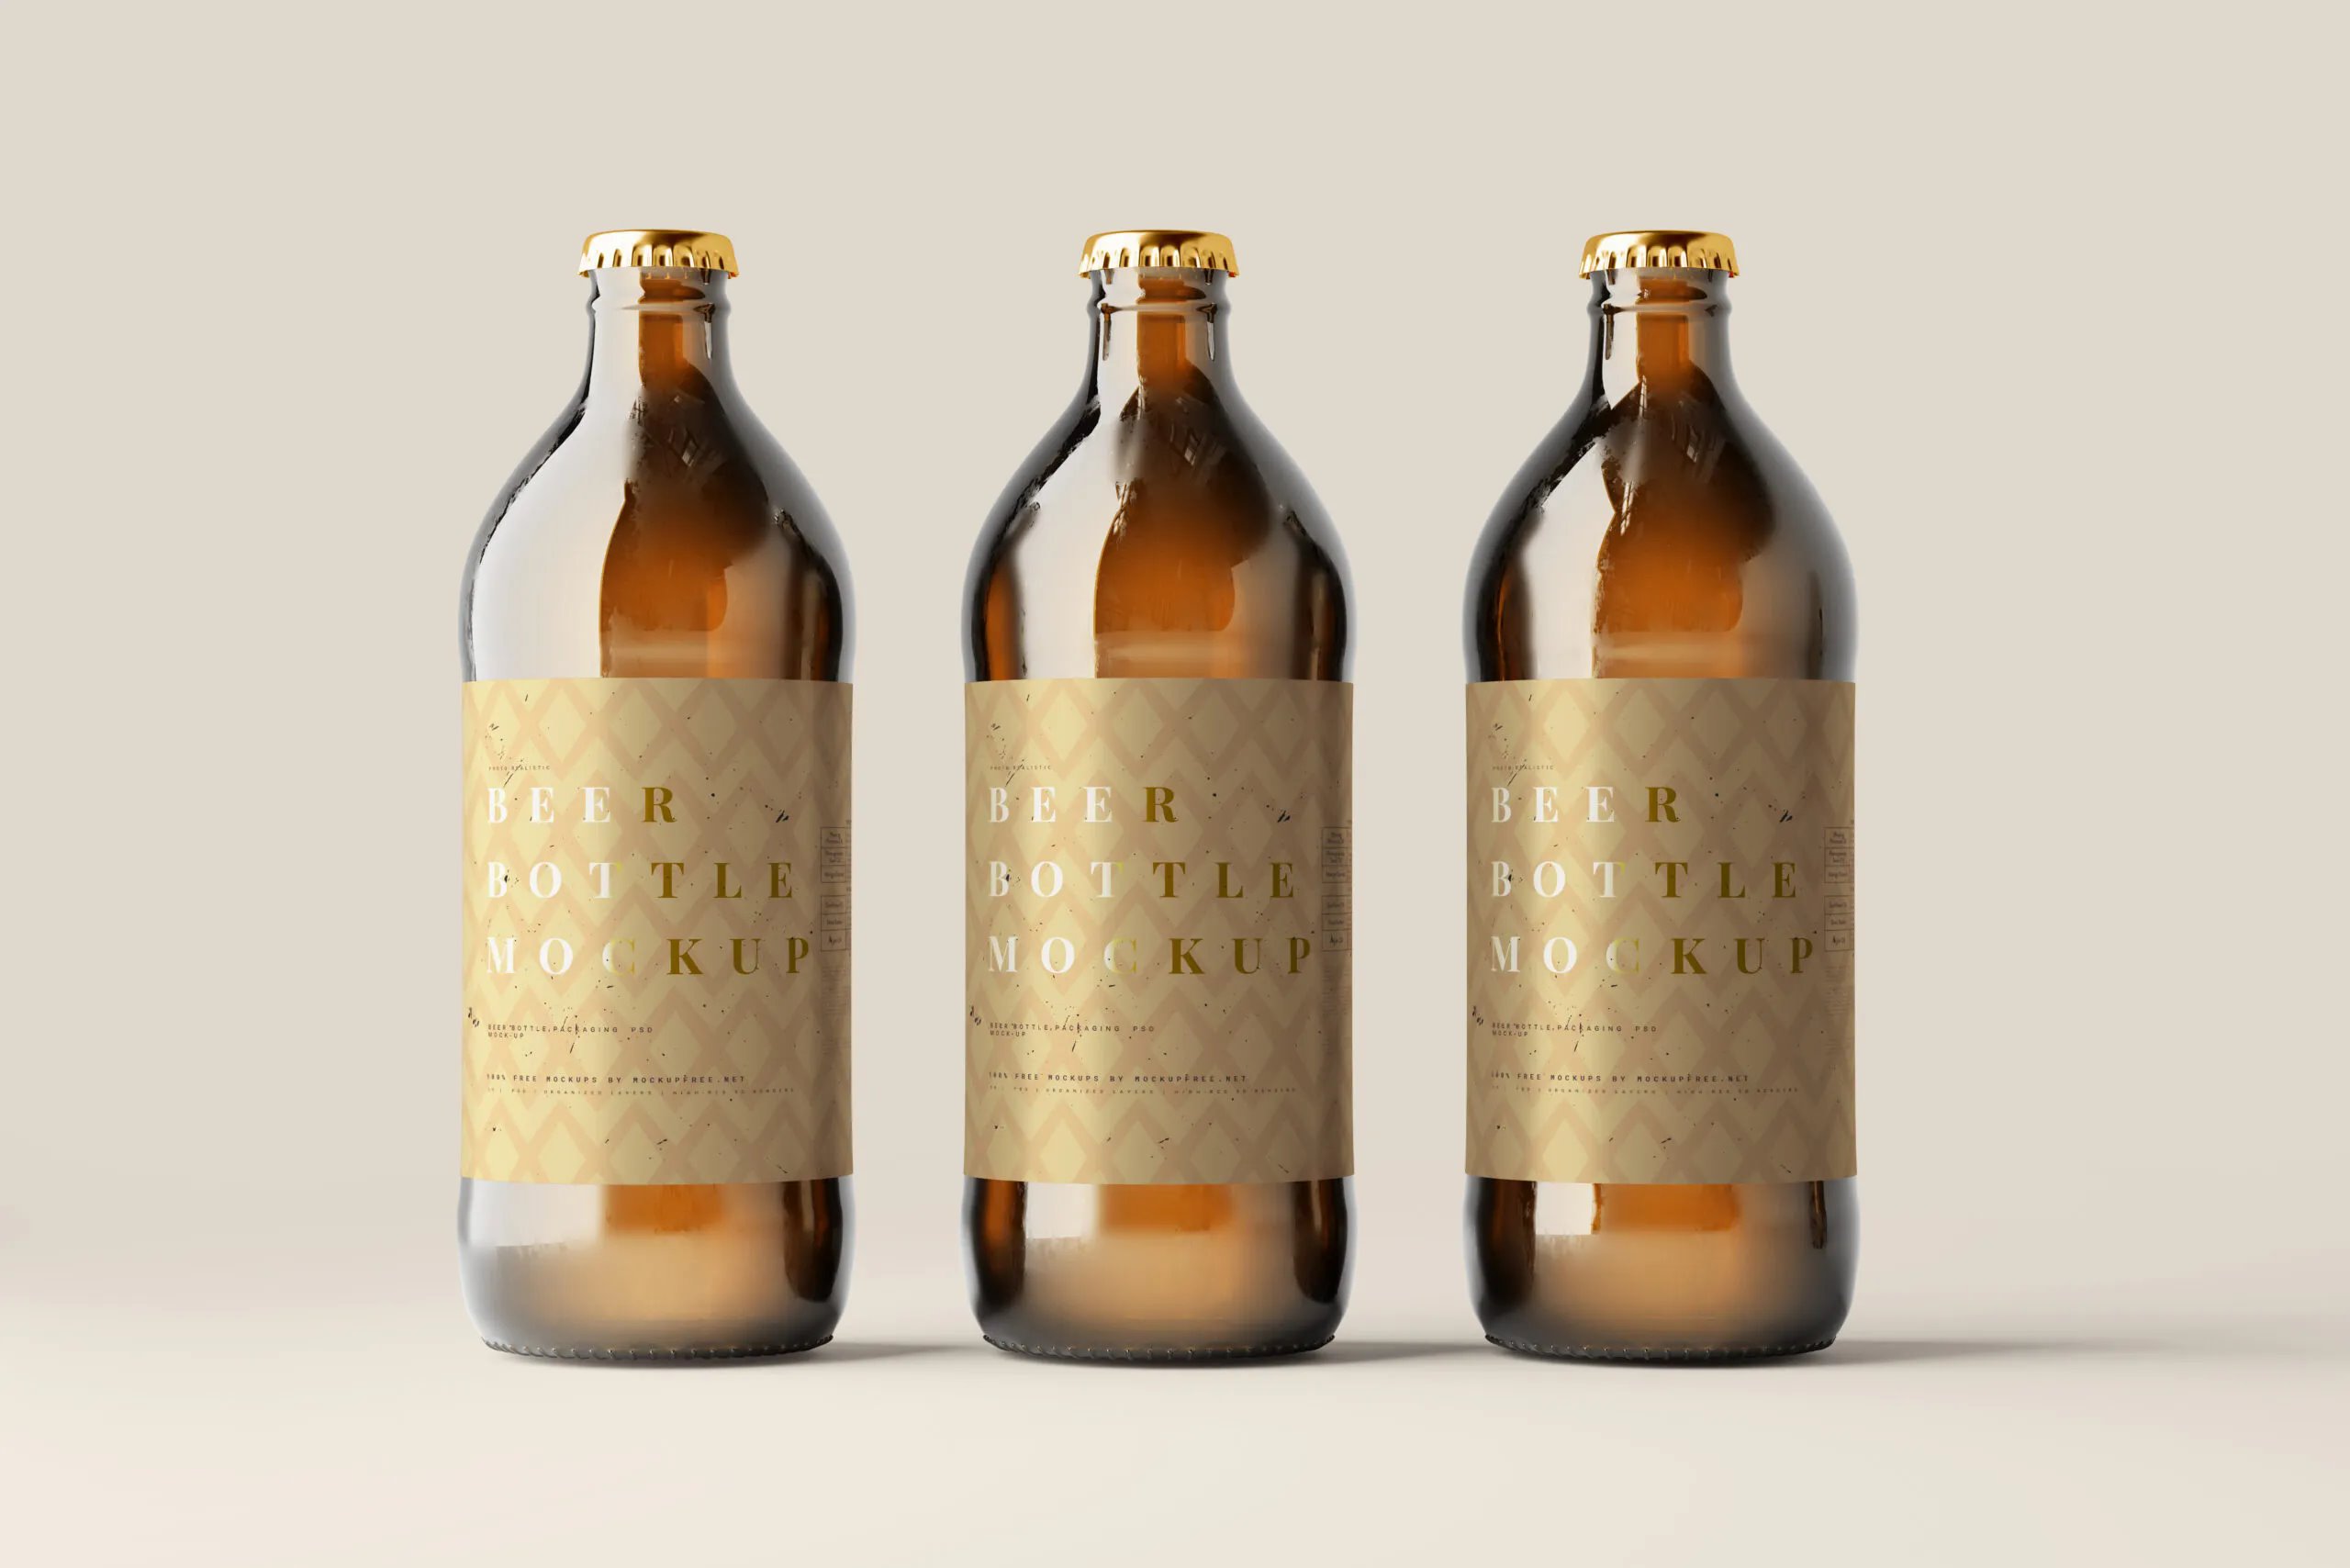 10 Large Beer Bottle Mockups in Different Visions FREE PSD